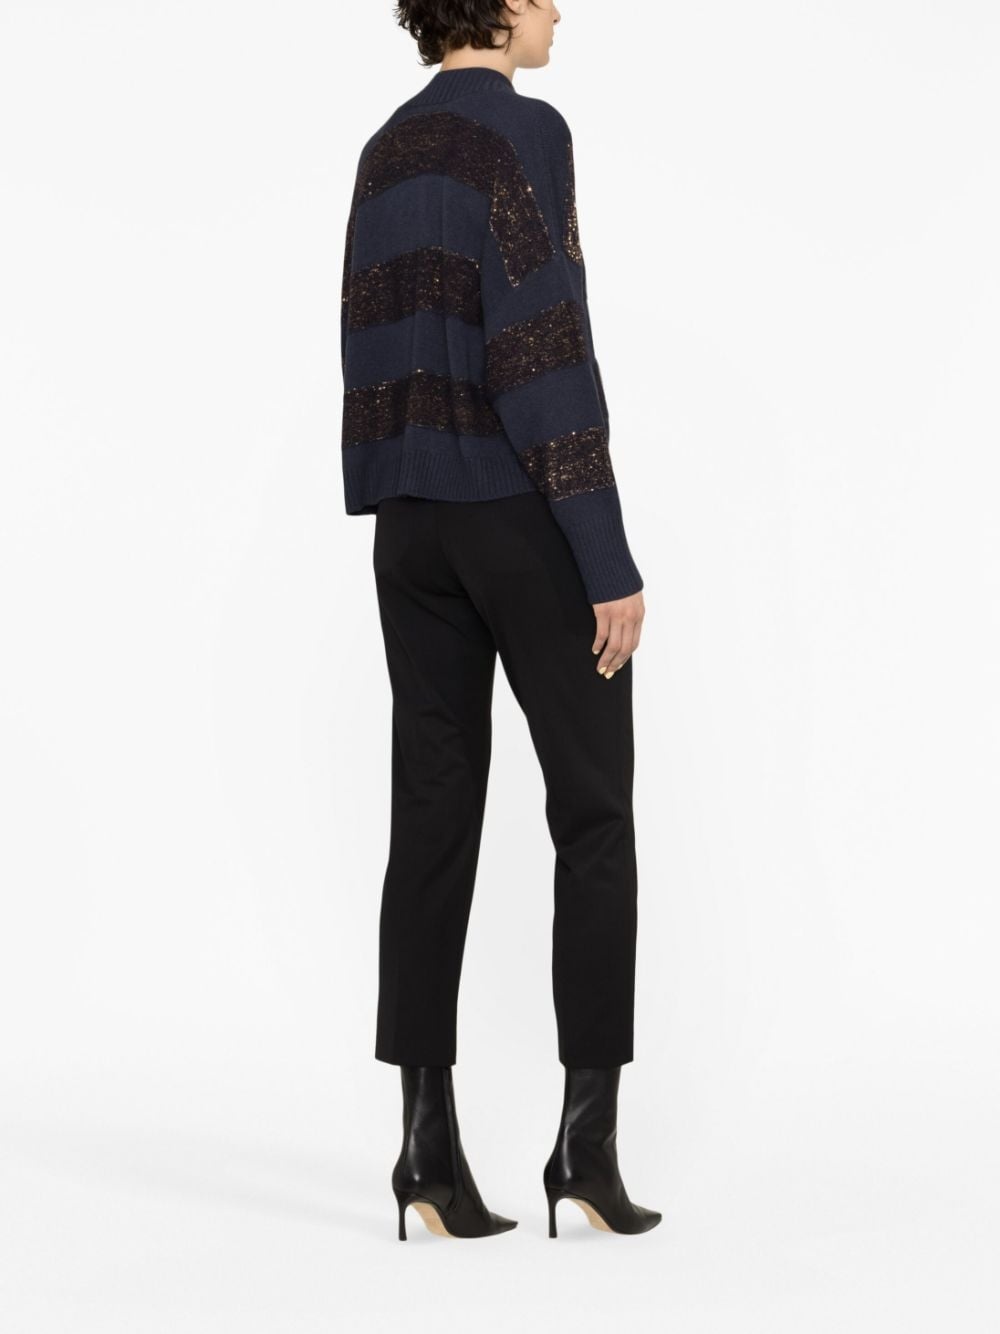 sequin-embellished knitted cardigan - 4